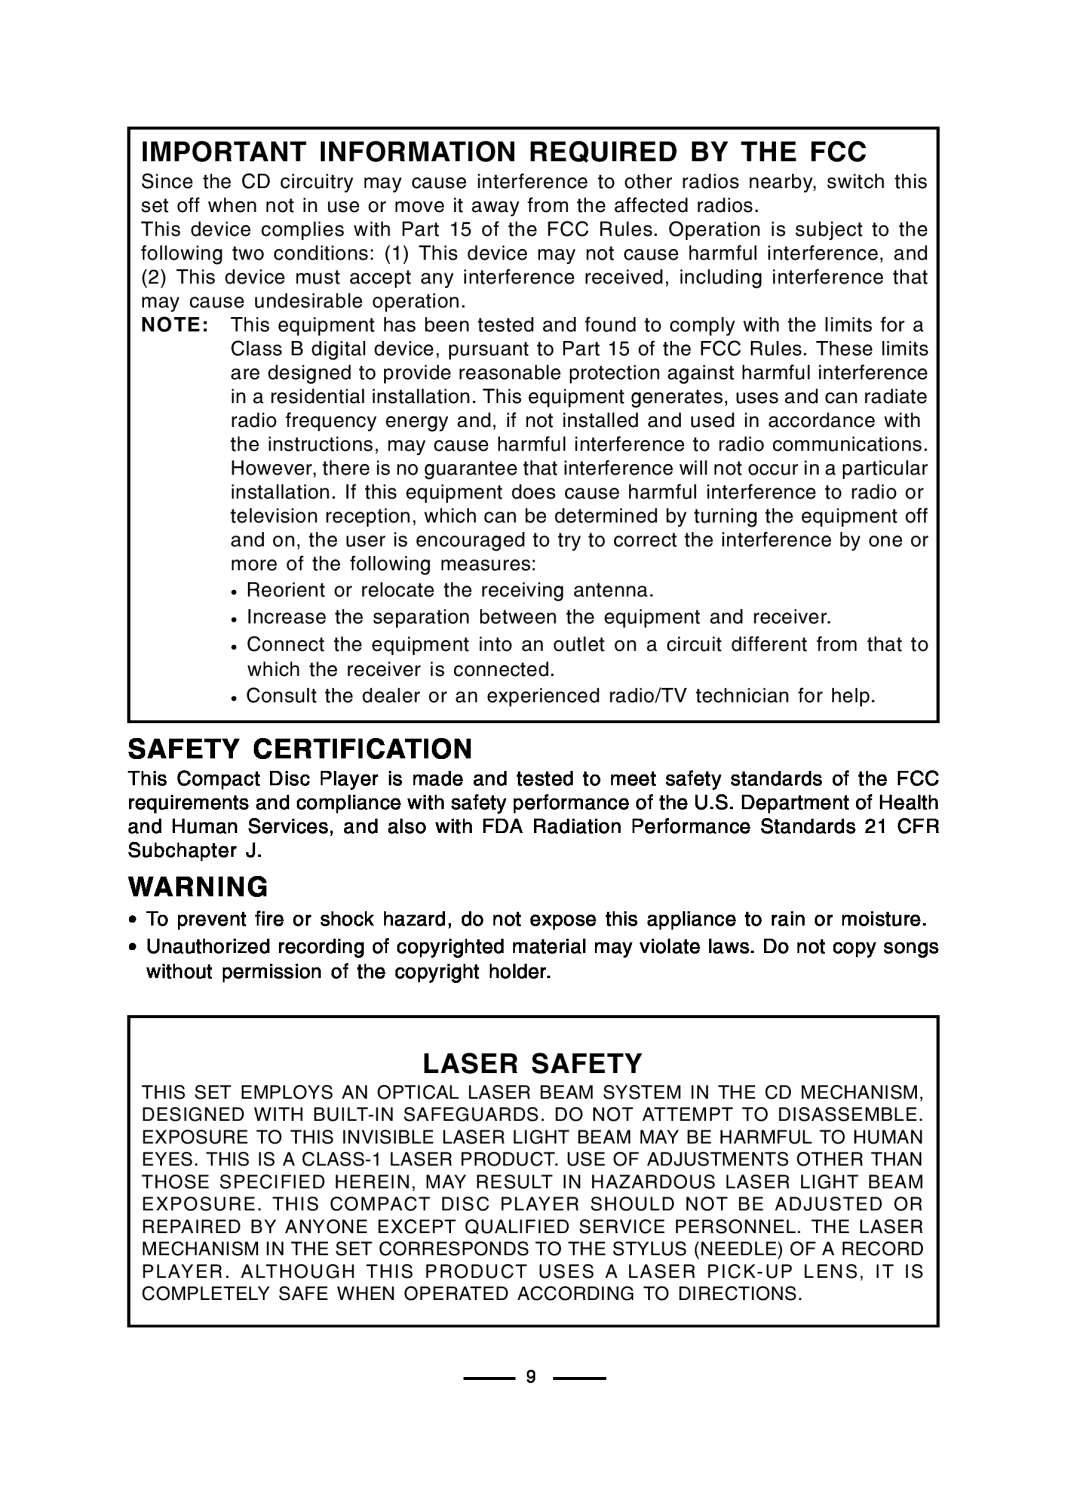 Lenoxx Electronics CD-50 Important Information Required By The Fcc, Safety Certification, Laser Safety 